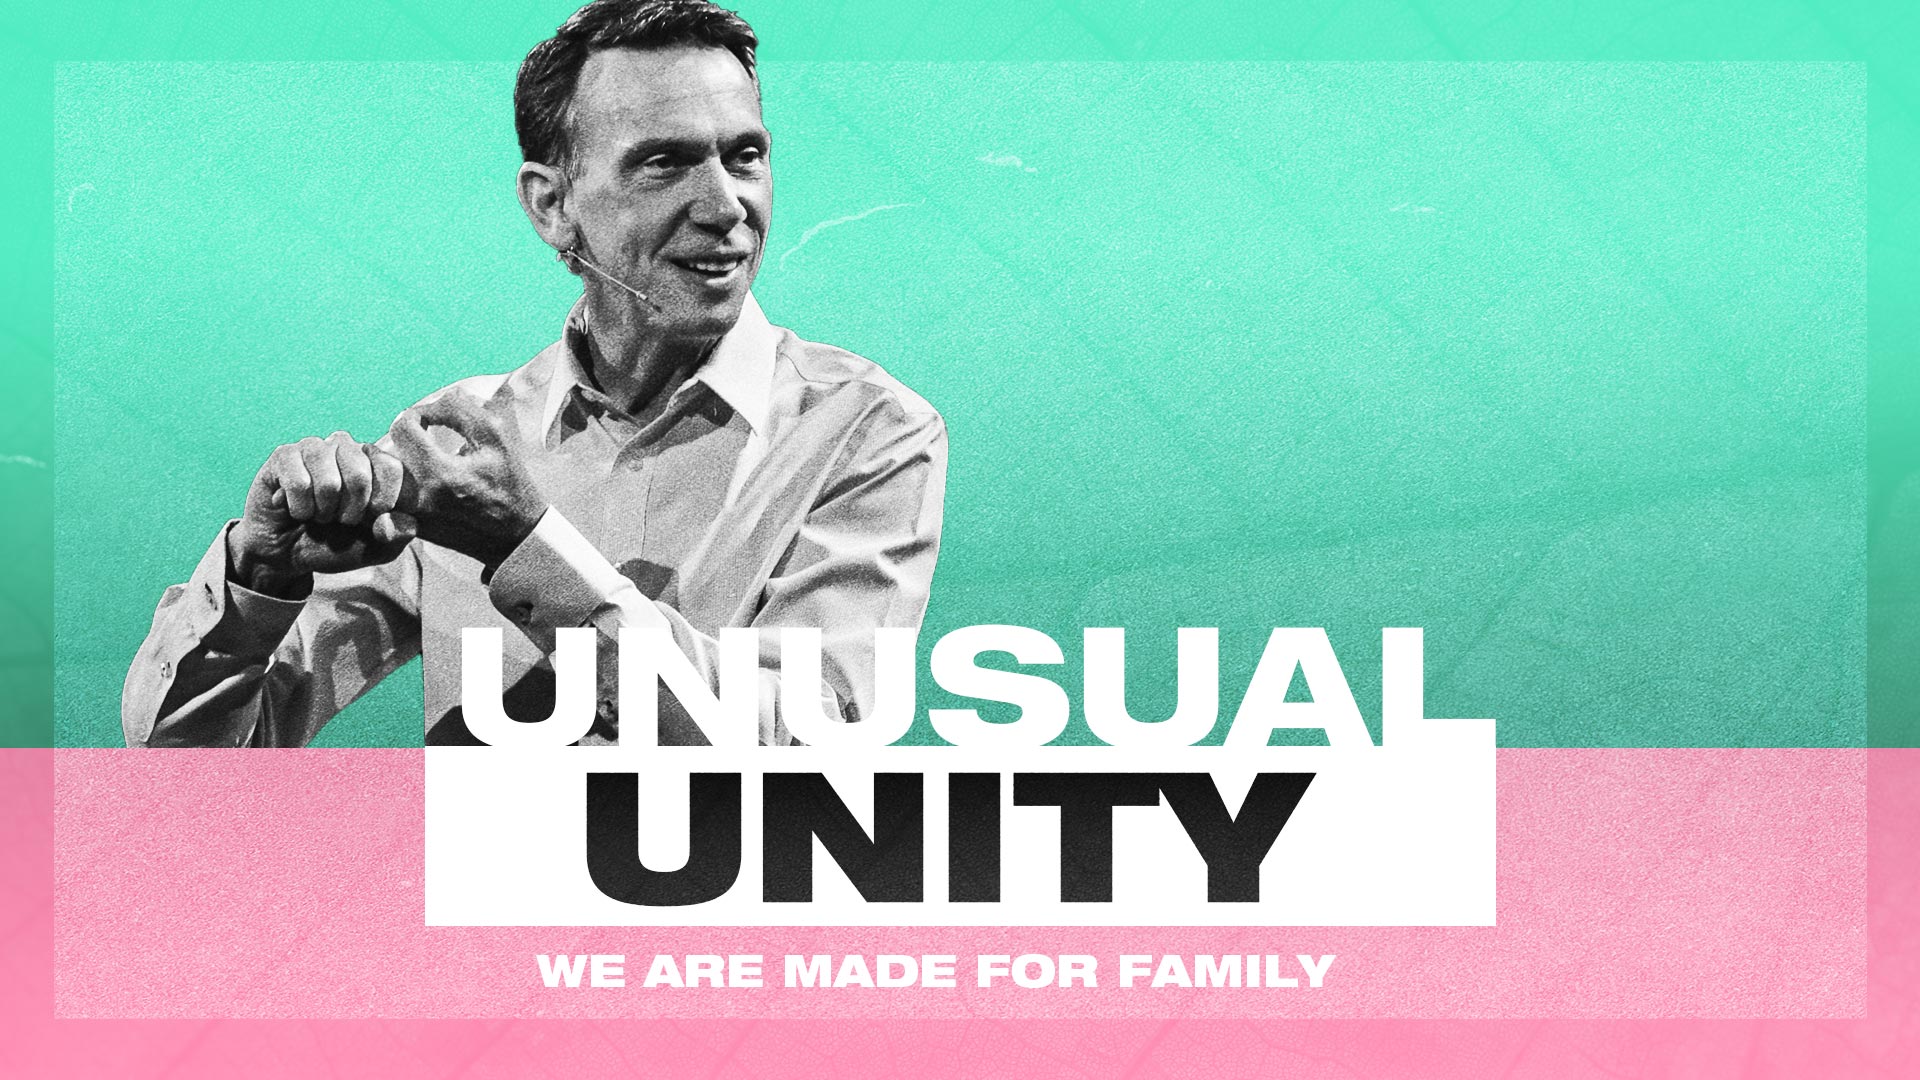 Unusual Unity, We Are Made for Family